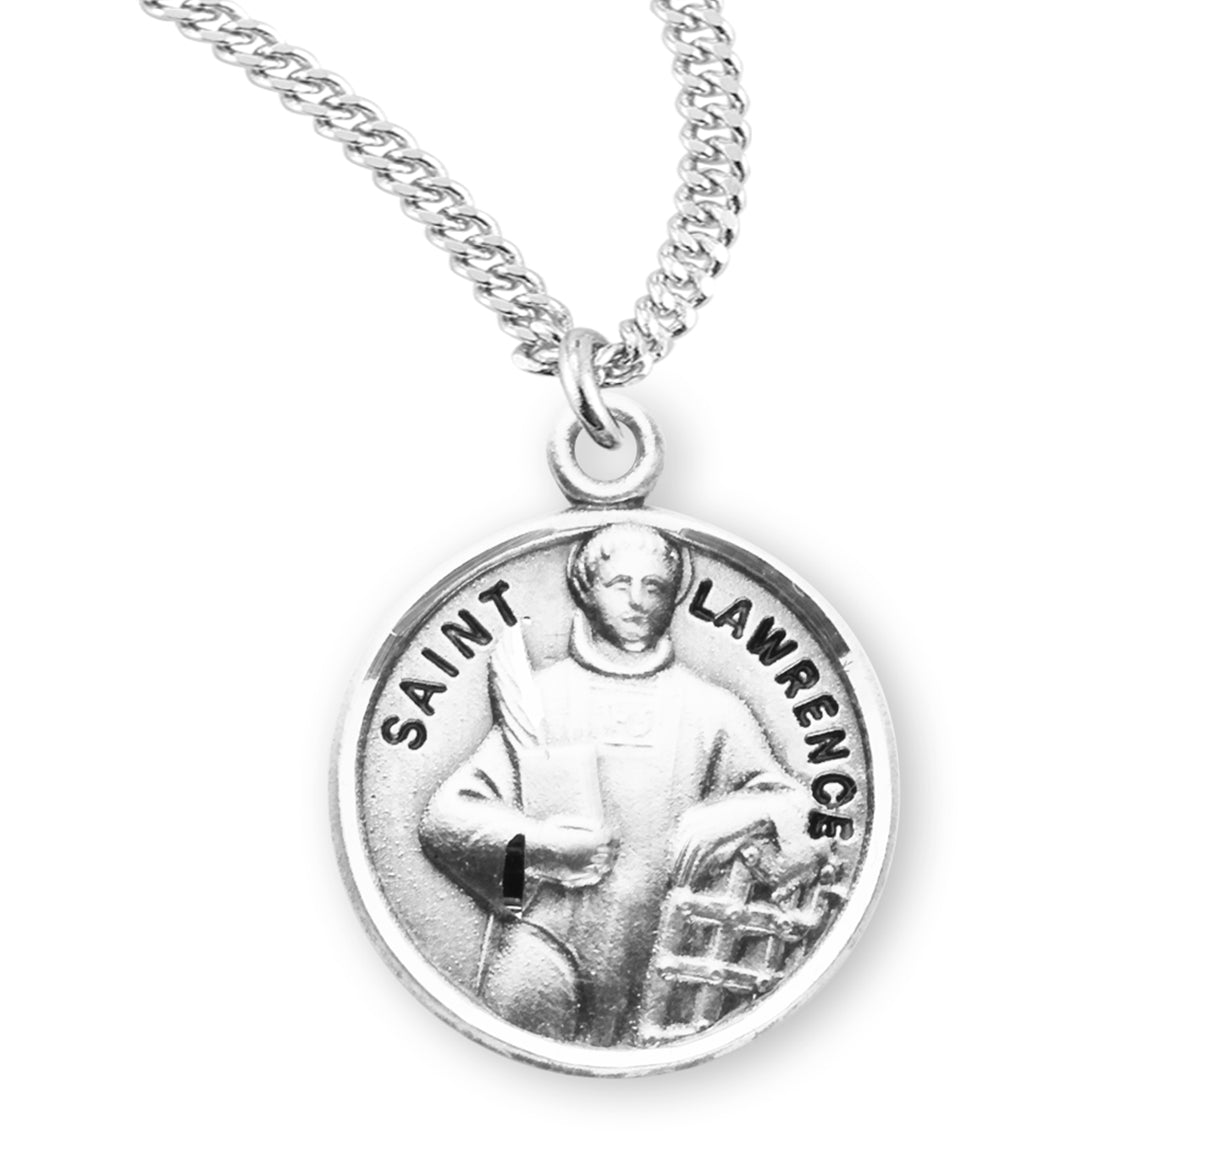 Patron Saint Lawrence Round Sterling Silver Medal